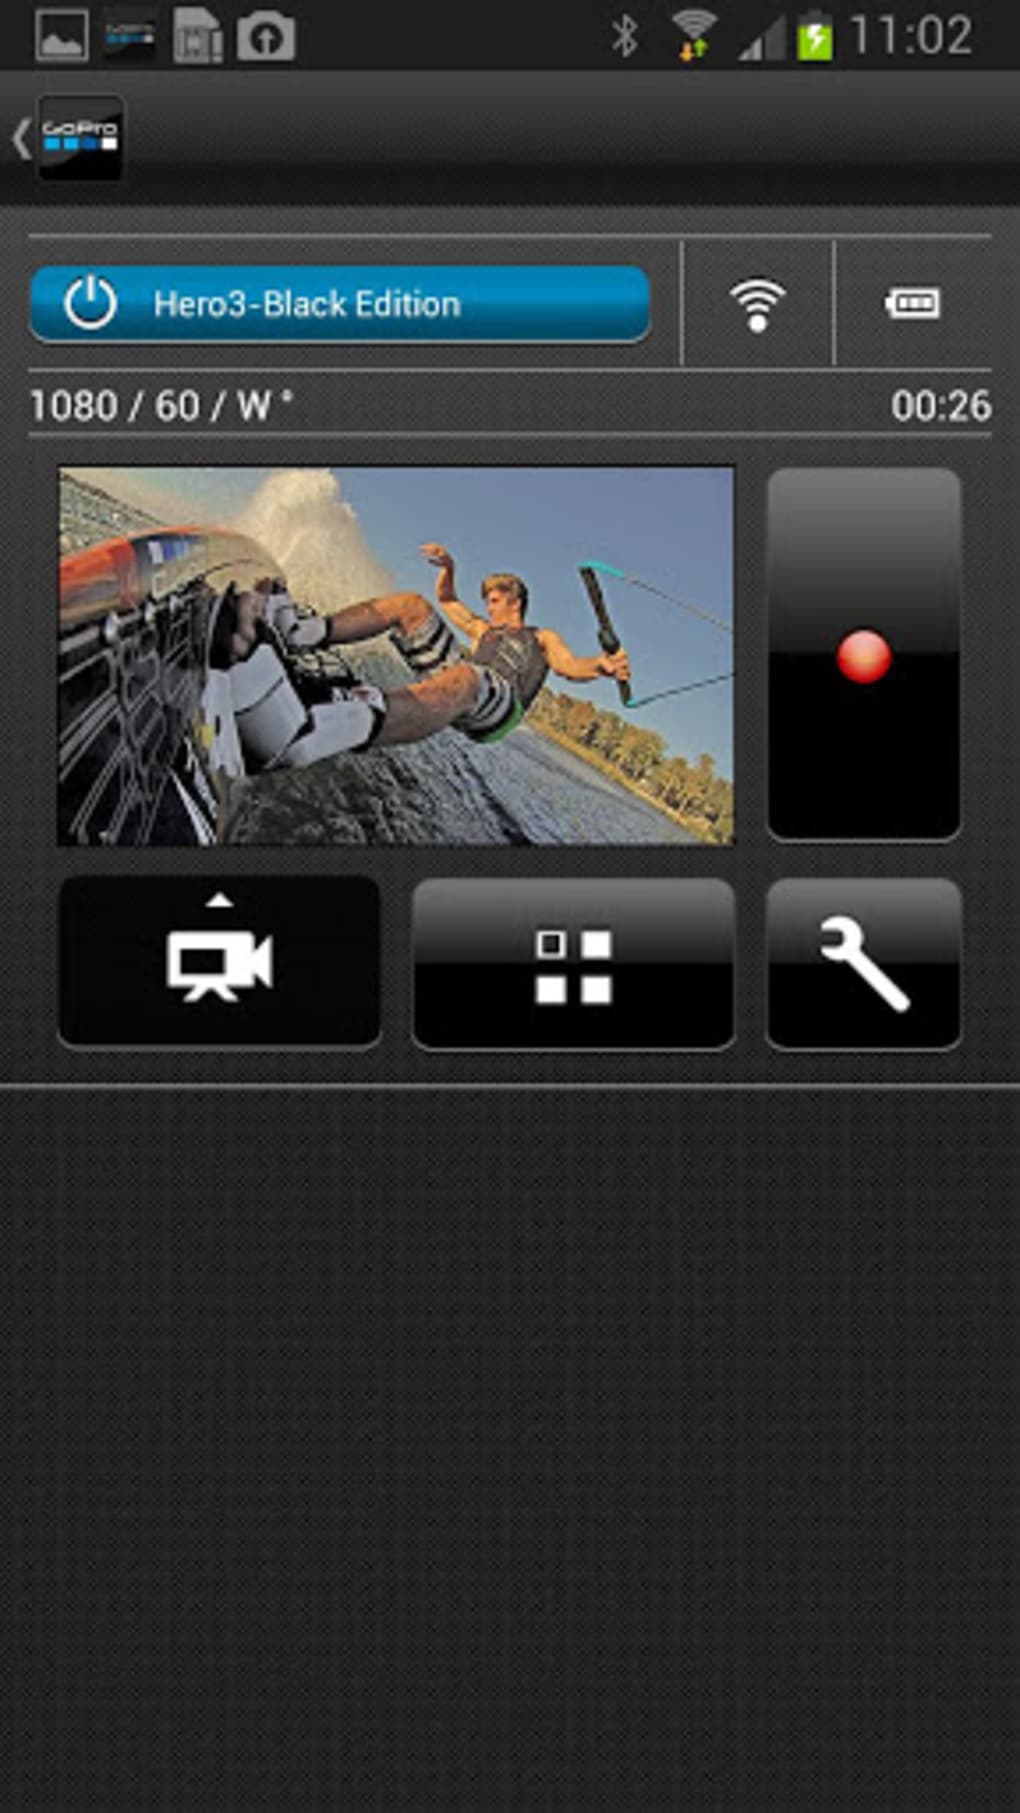 download gopro app android